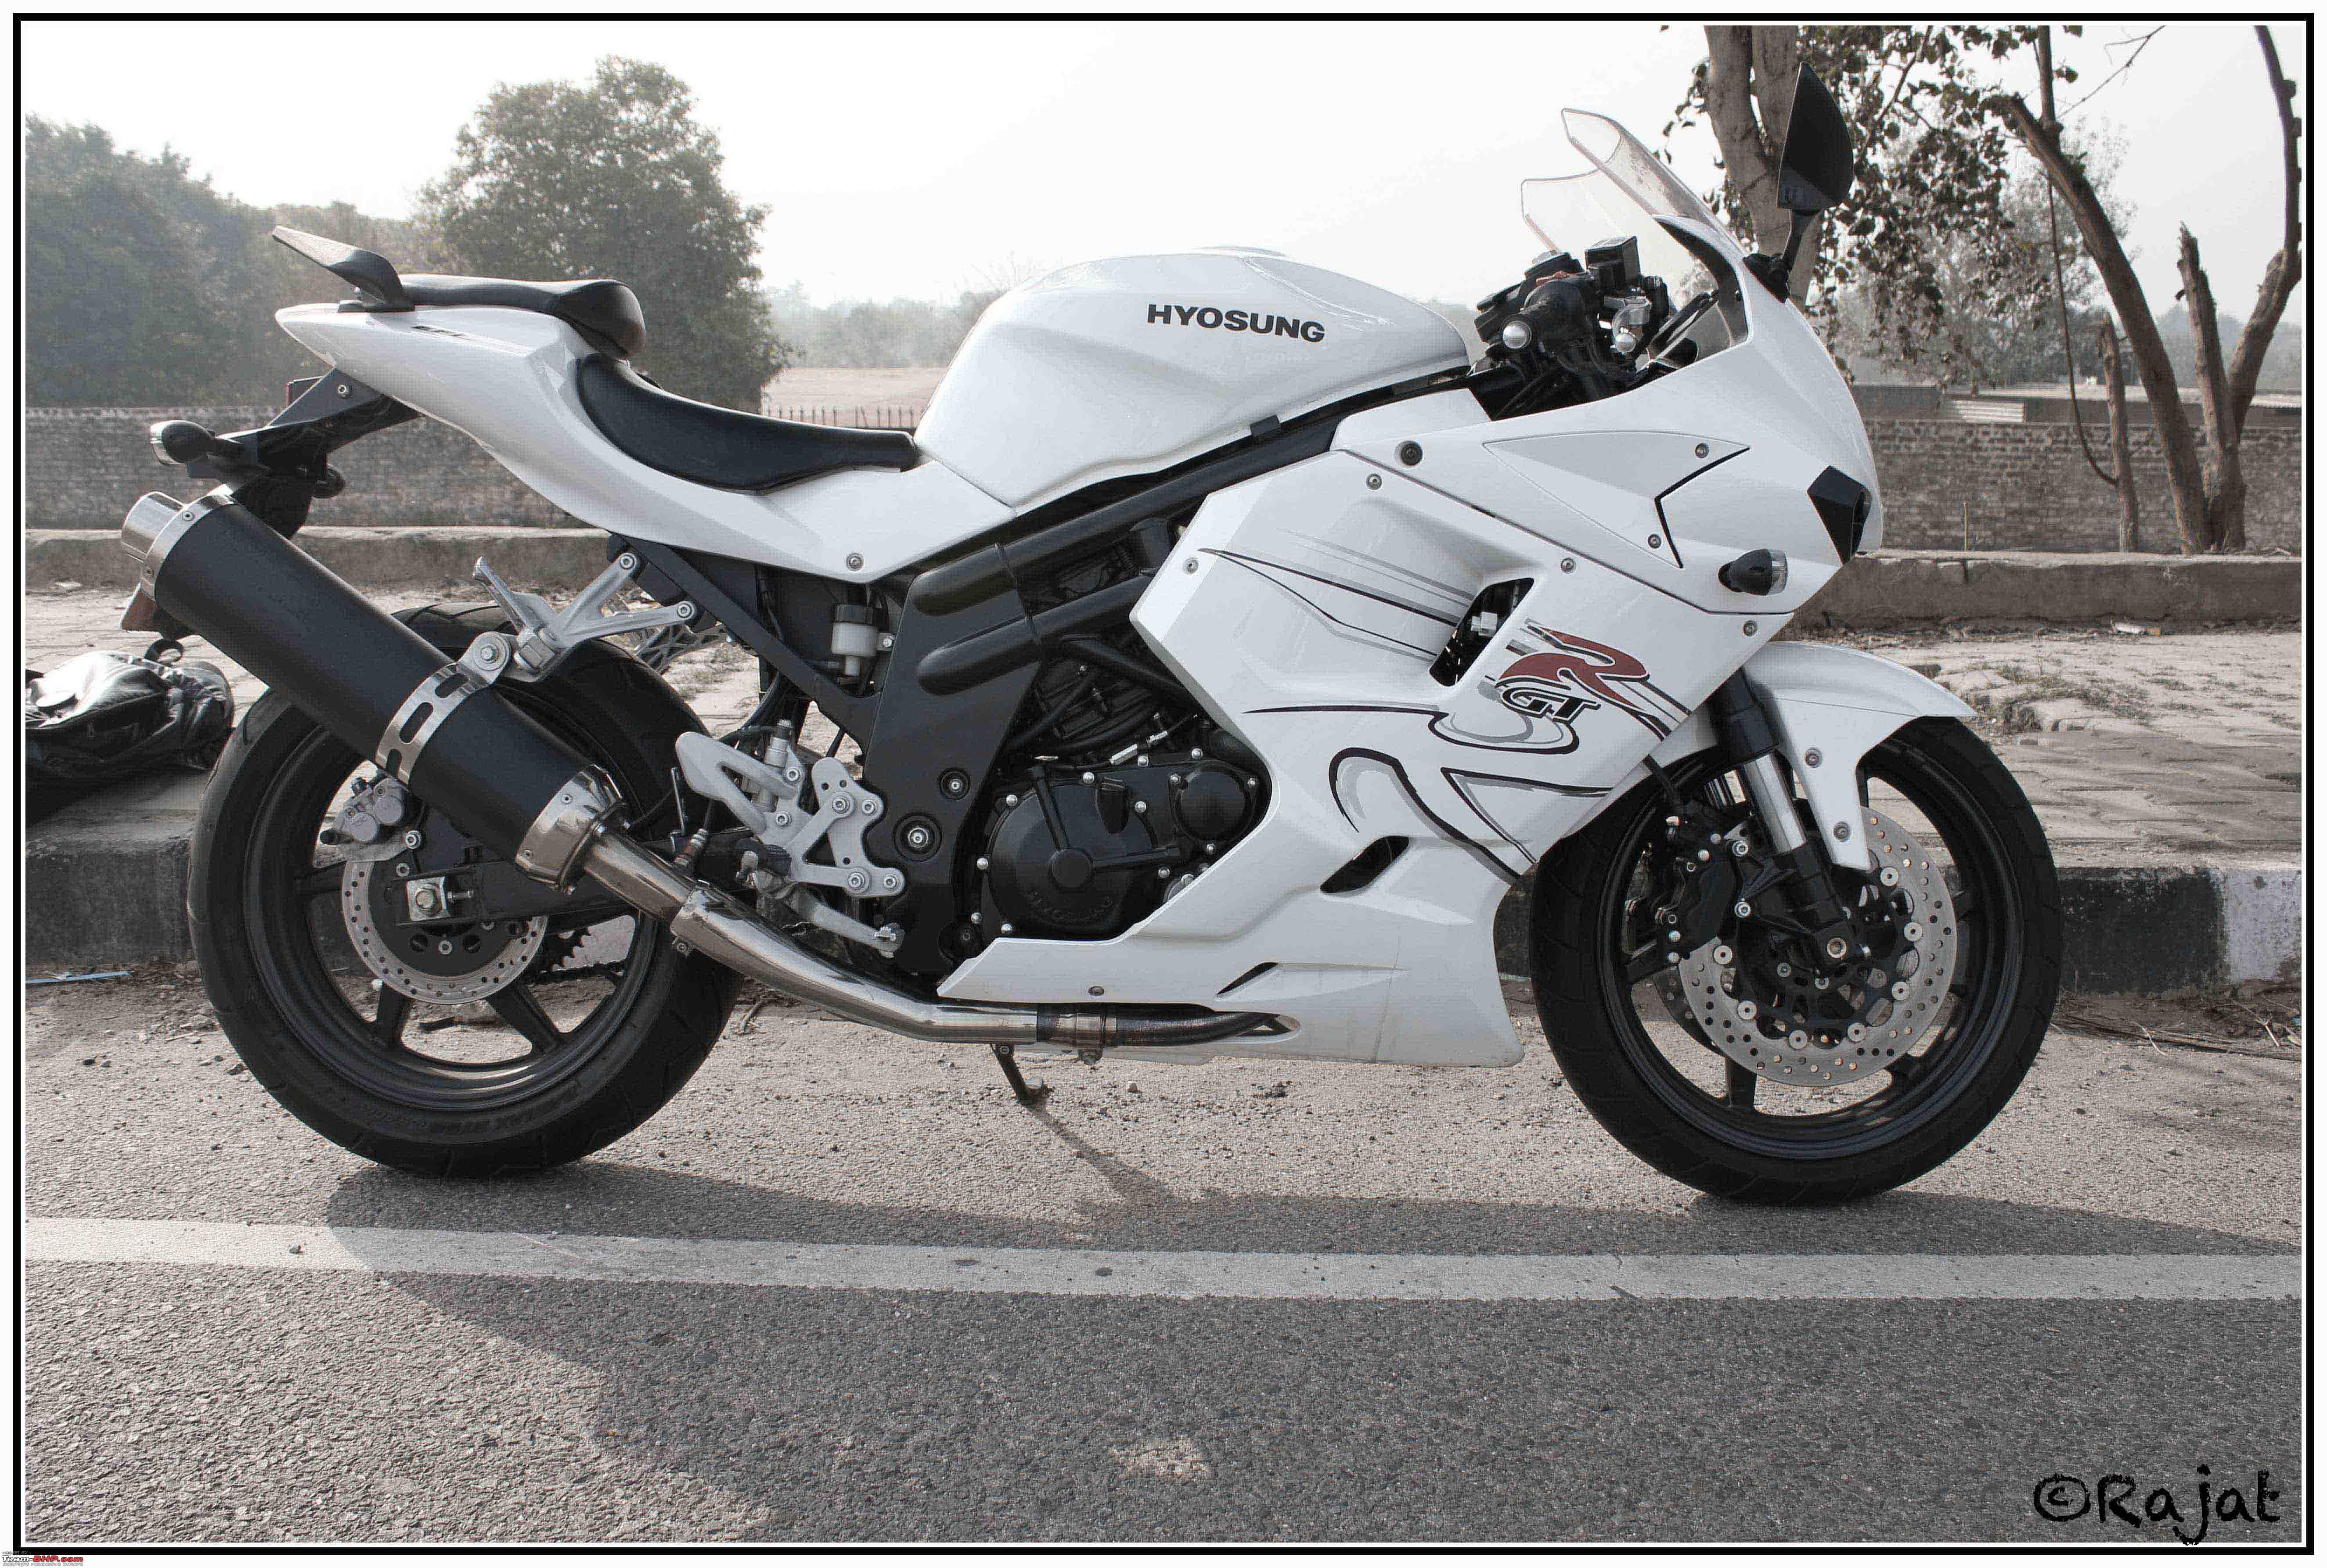 My white glory is here - Hyosung GT650R - Page 6 - Team-BHP